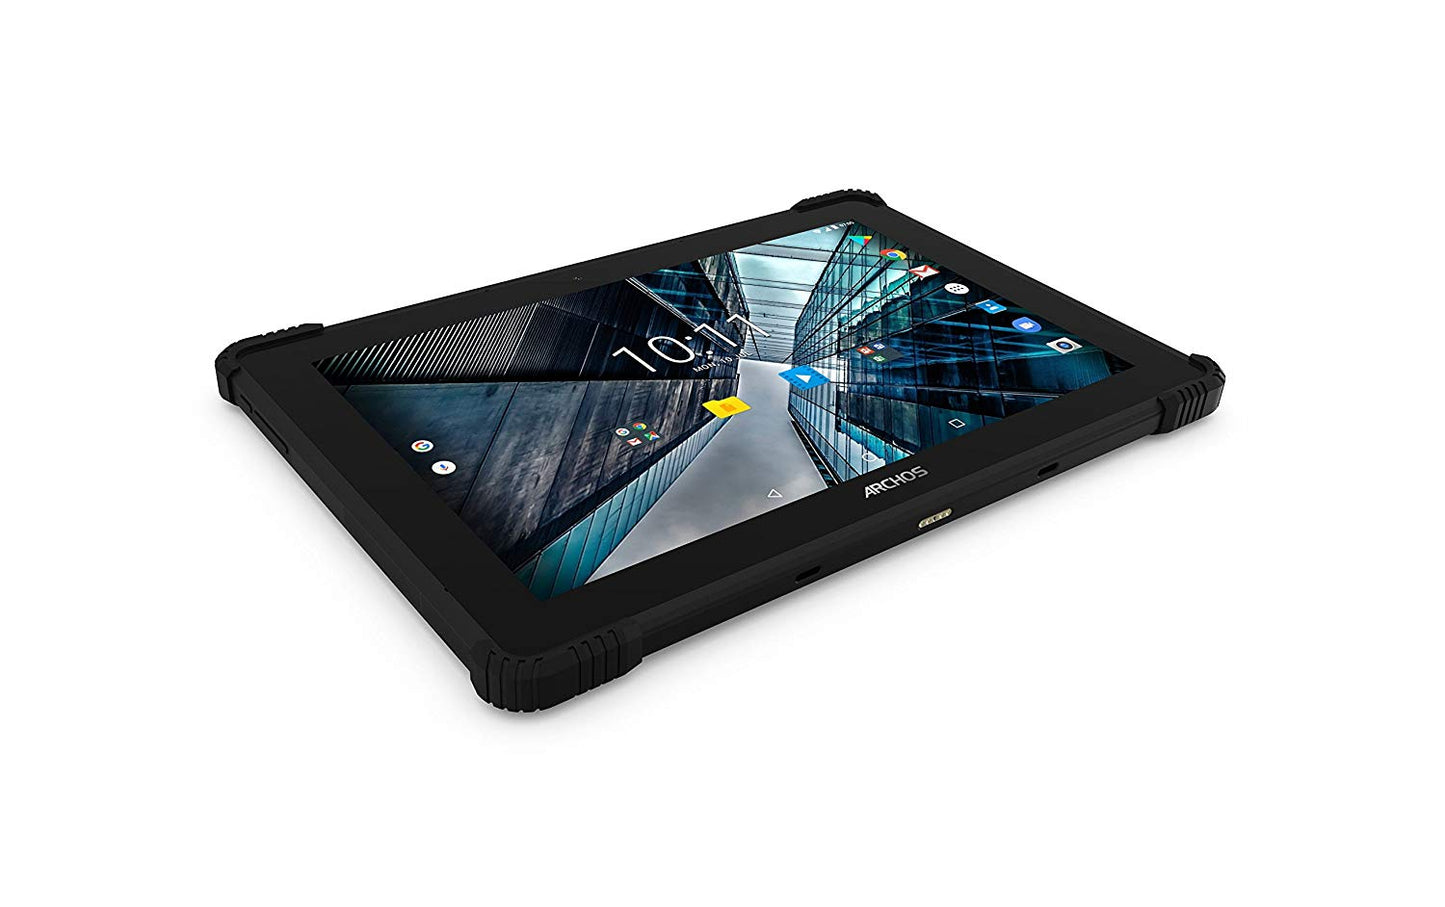 'Archos 503451 Touch Screen Tablet 10.1 (16GB